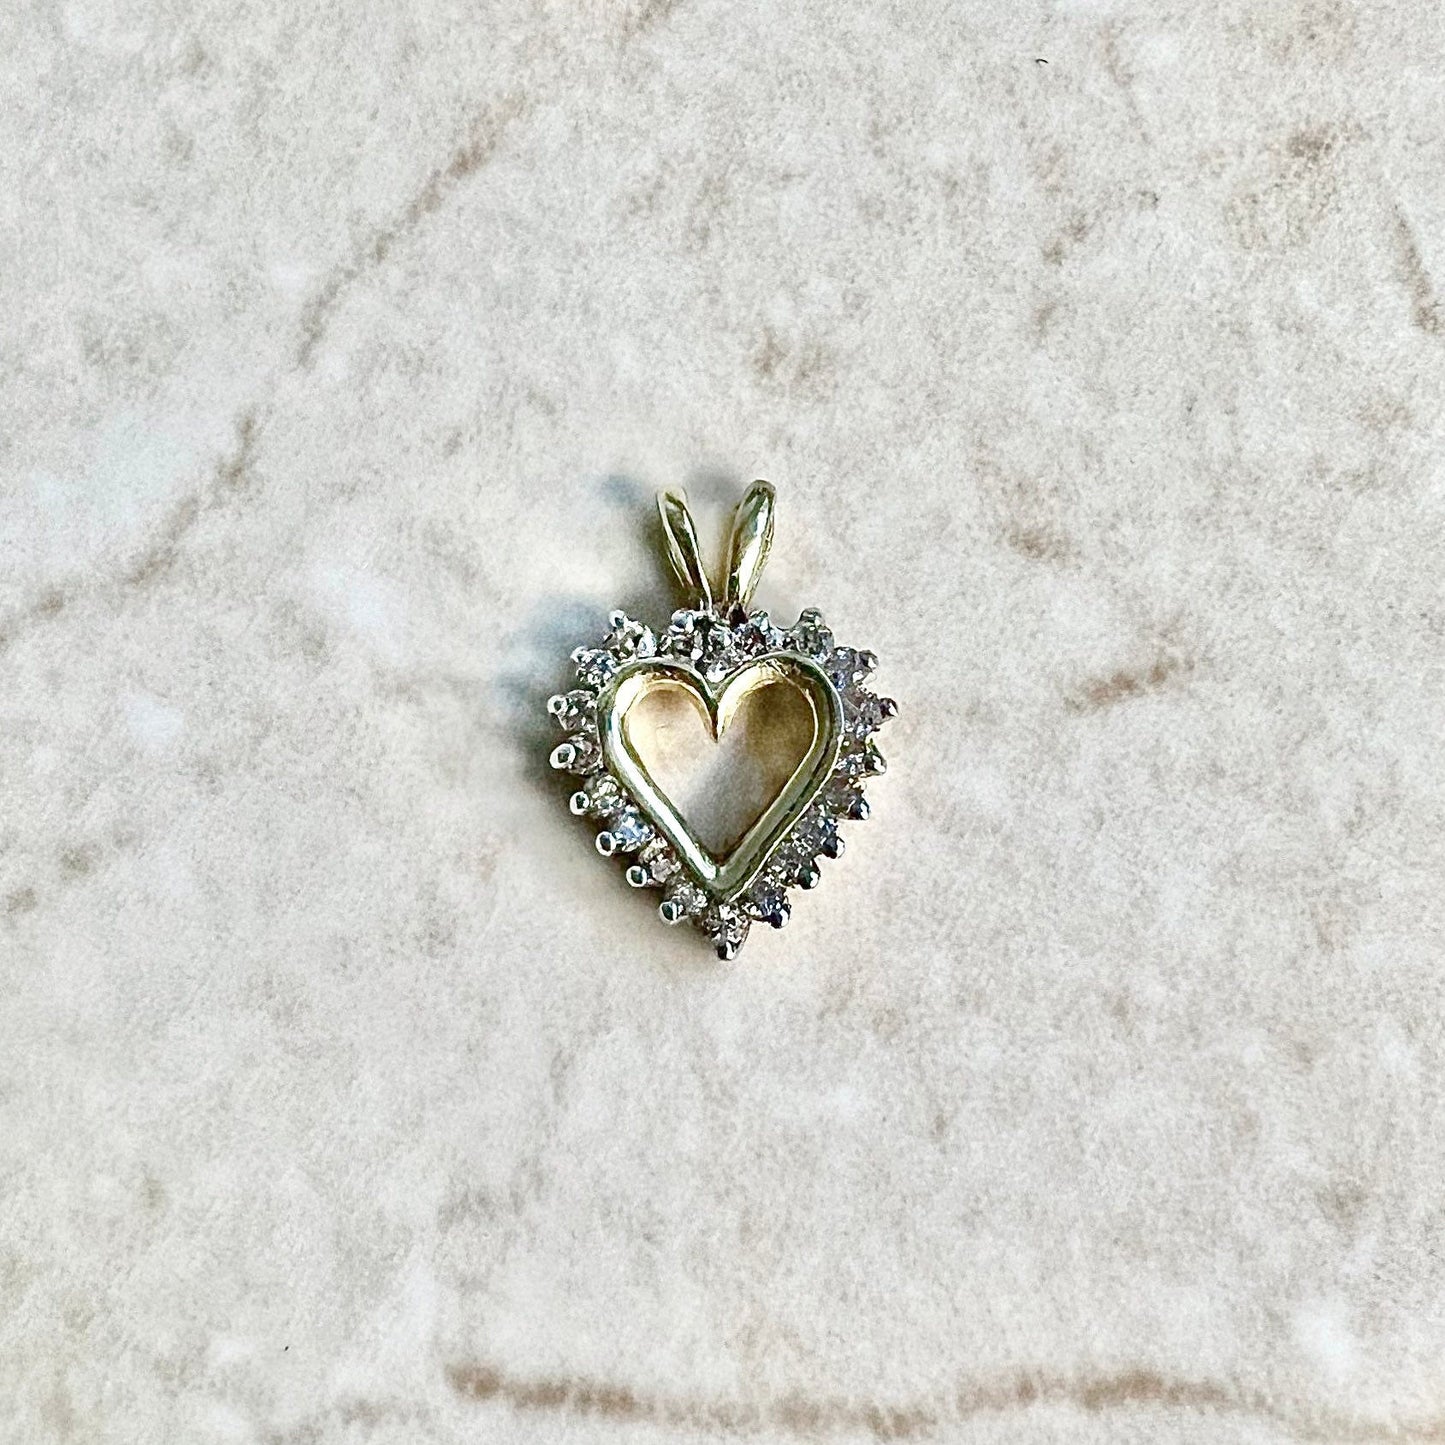 14K Diamond Heart Pendant Necklace 0.20 CTTW - Yellow Gold Diamond Pendant - Heart Necklace - Best Gifts For Her - Valentine’s Day Gift